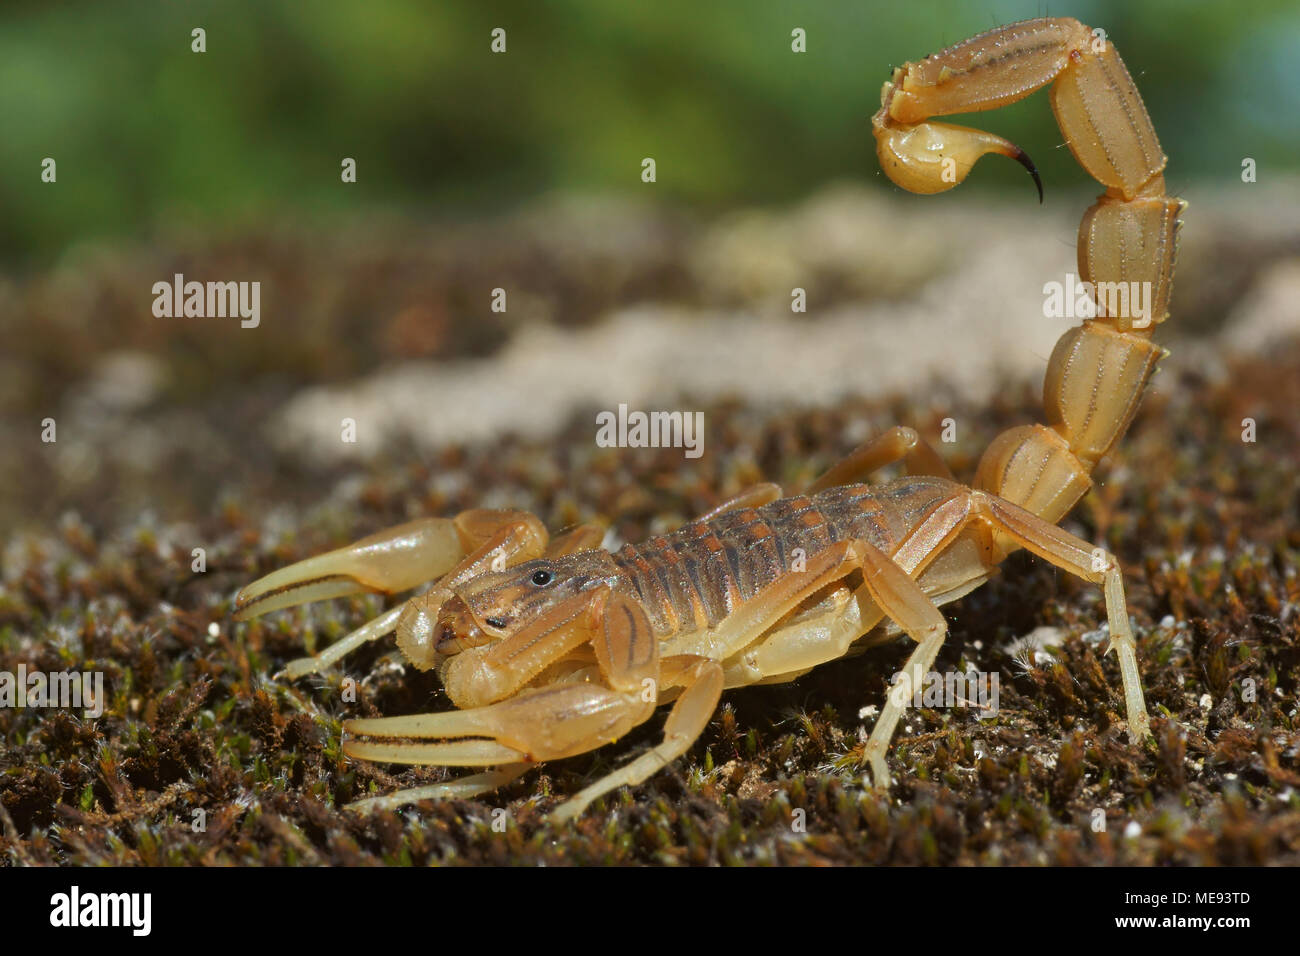 Macro of common yellow scorpion (Buthus occitanus) in defensive position. Picture taken in Spain. Stock Photo